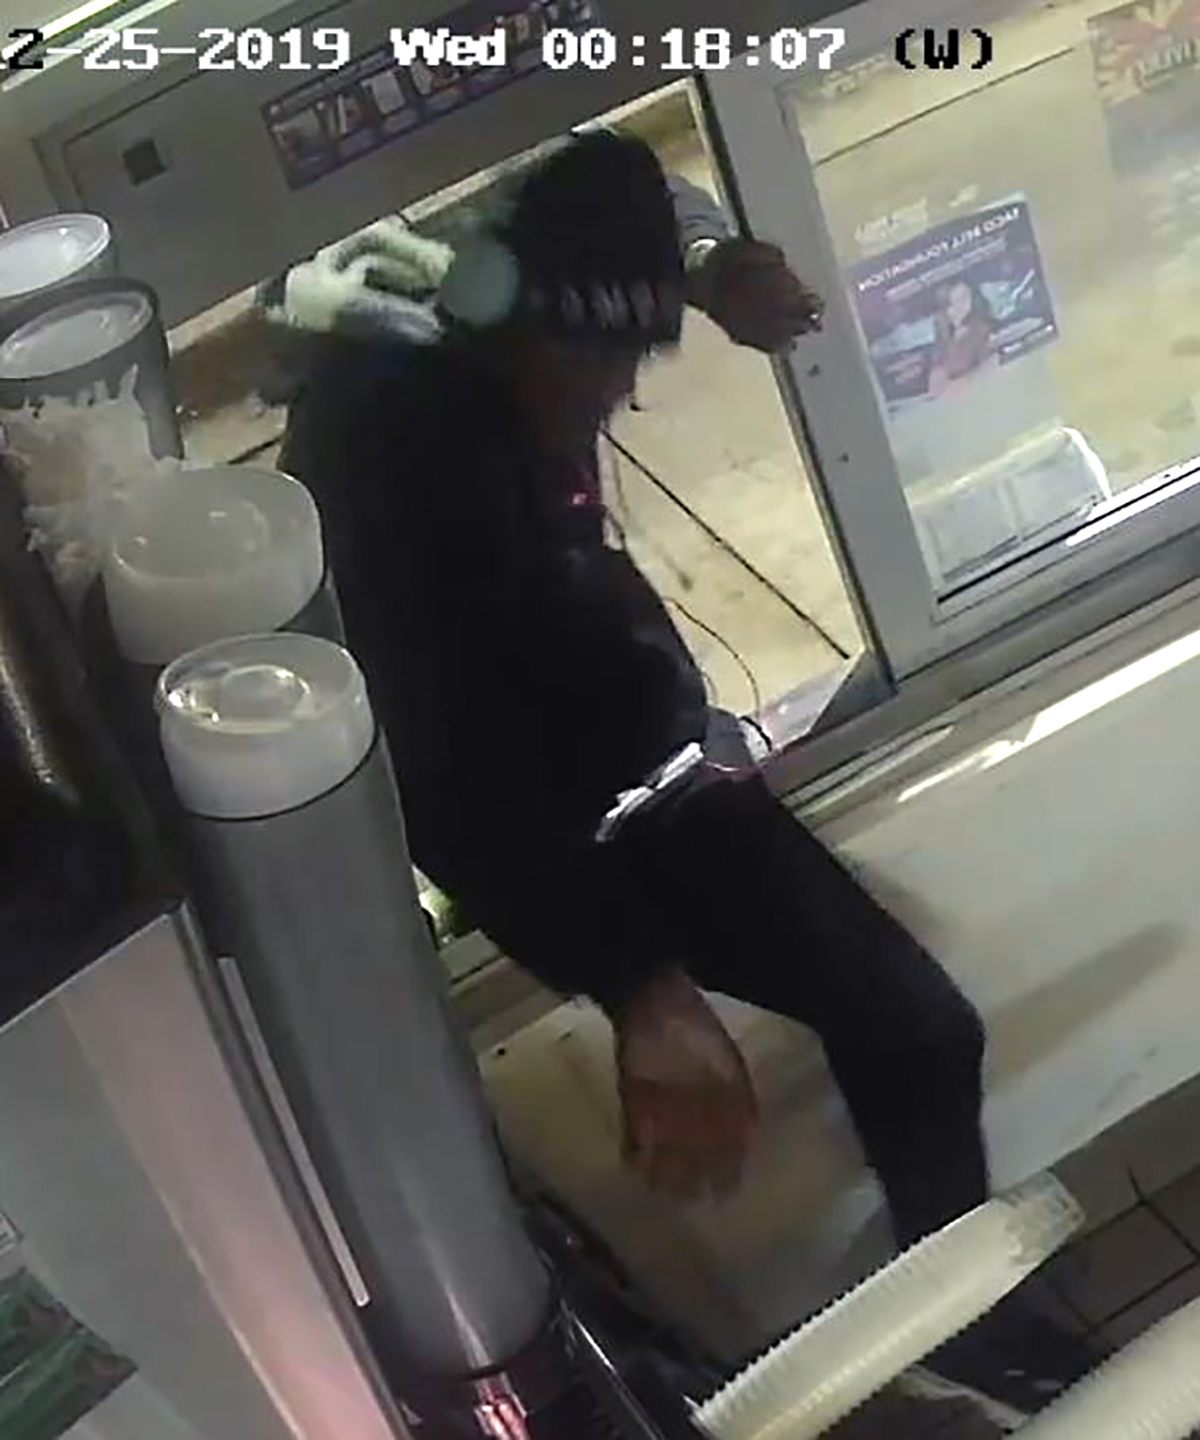 PHOTO: A man entered through a drive-thru window and then prepared food and napped during a burglary at a local Taco Bell in Lawrenceville, Ga., on Dec. 25, 2019.